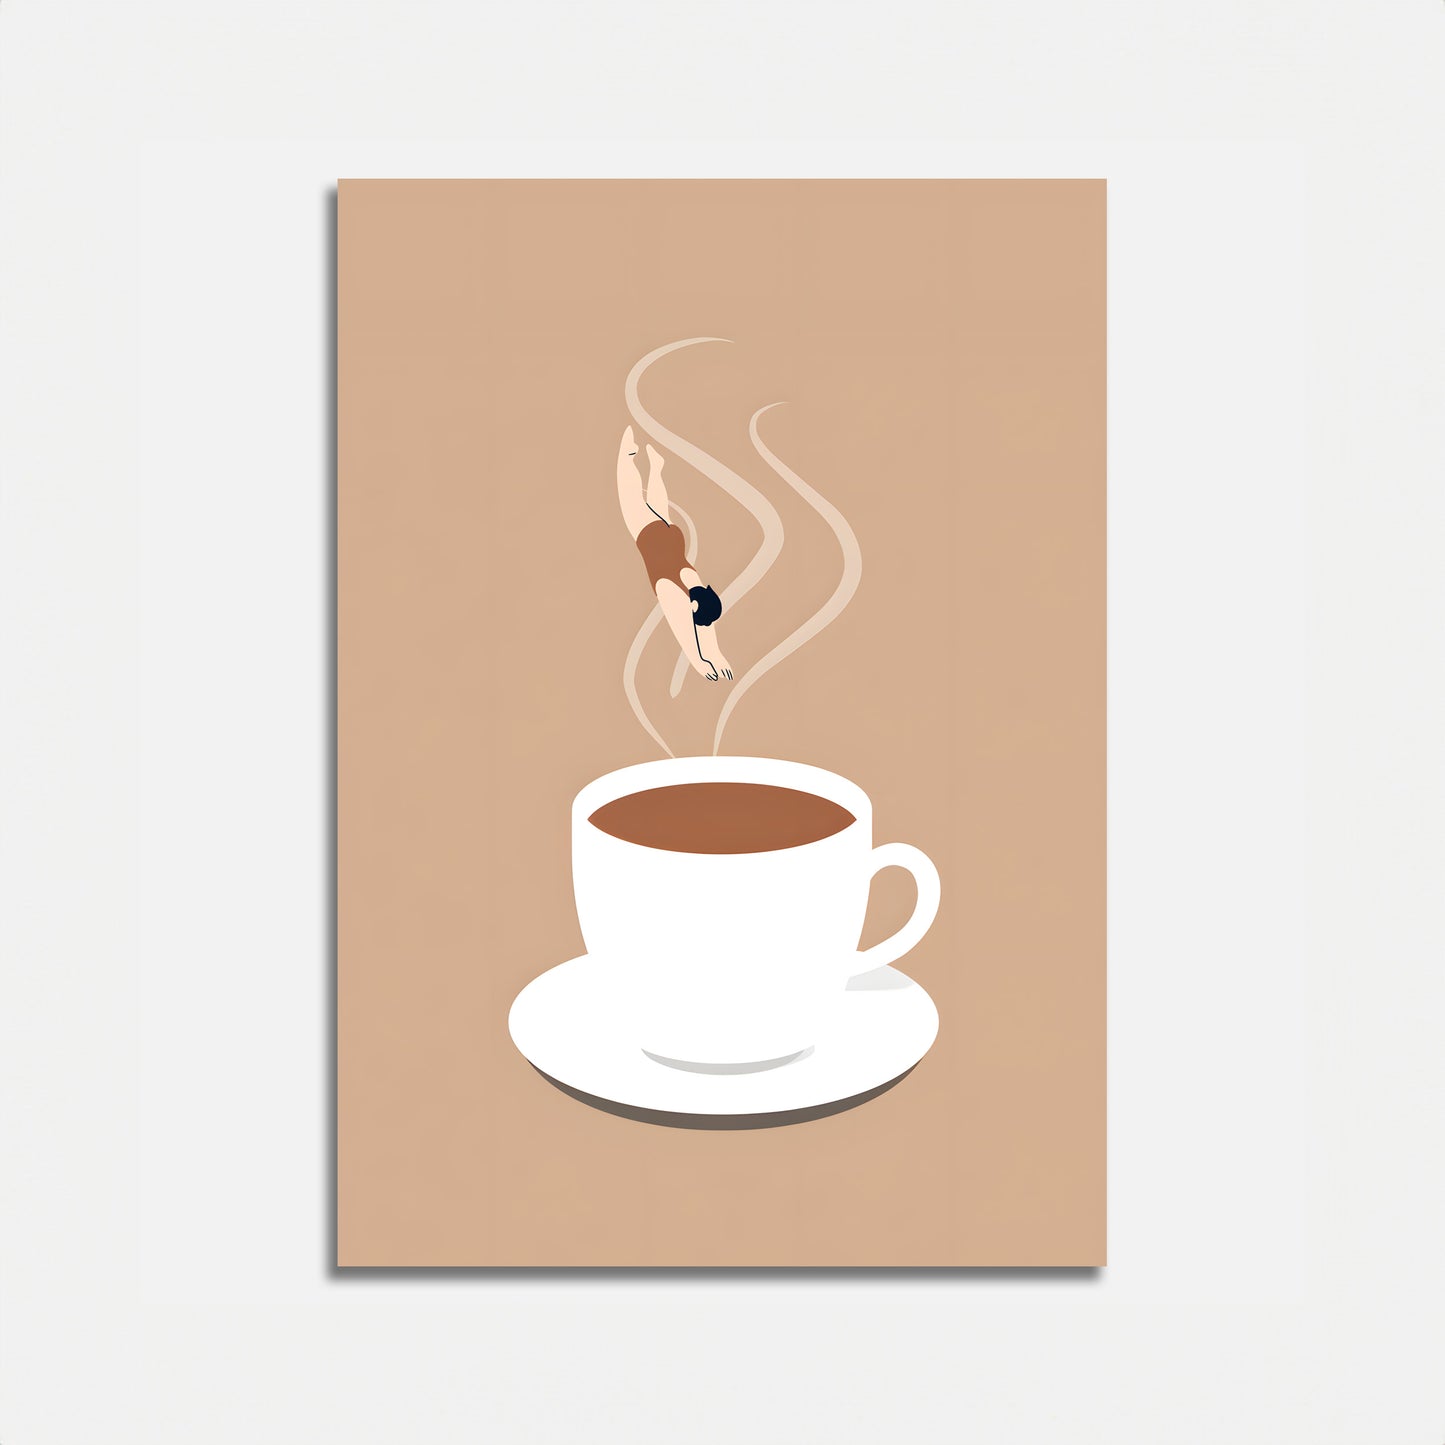 Illustration of a tiny dancer above a coffee cup with steam intertwining.